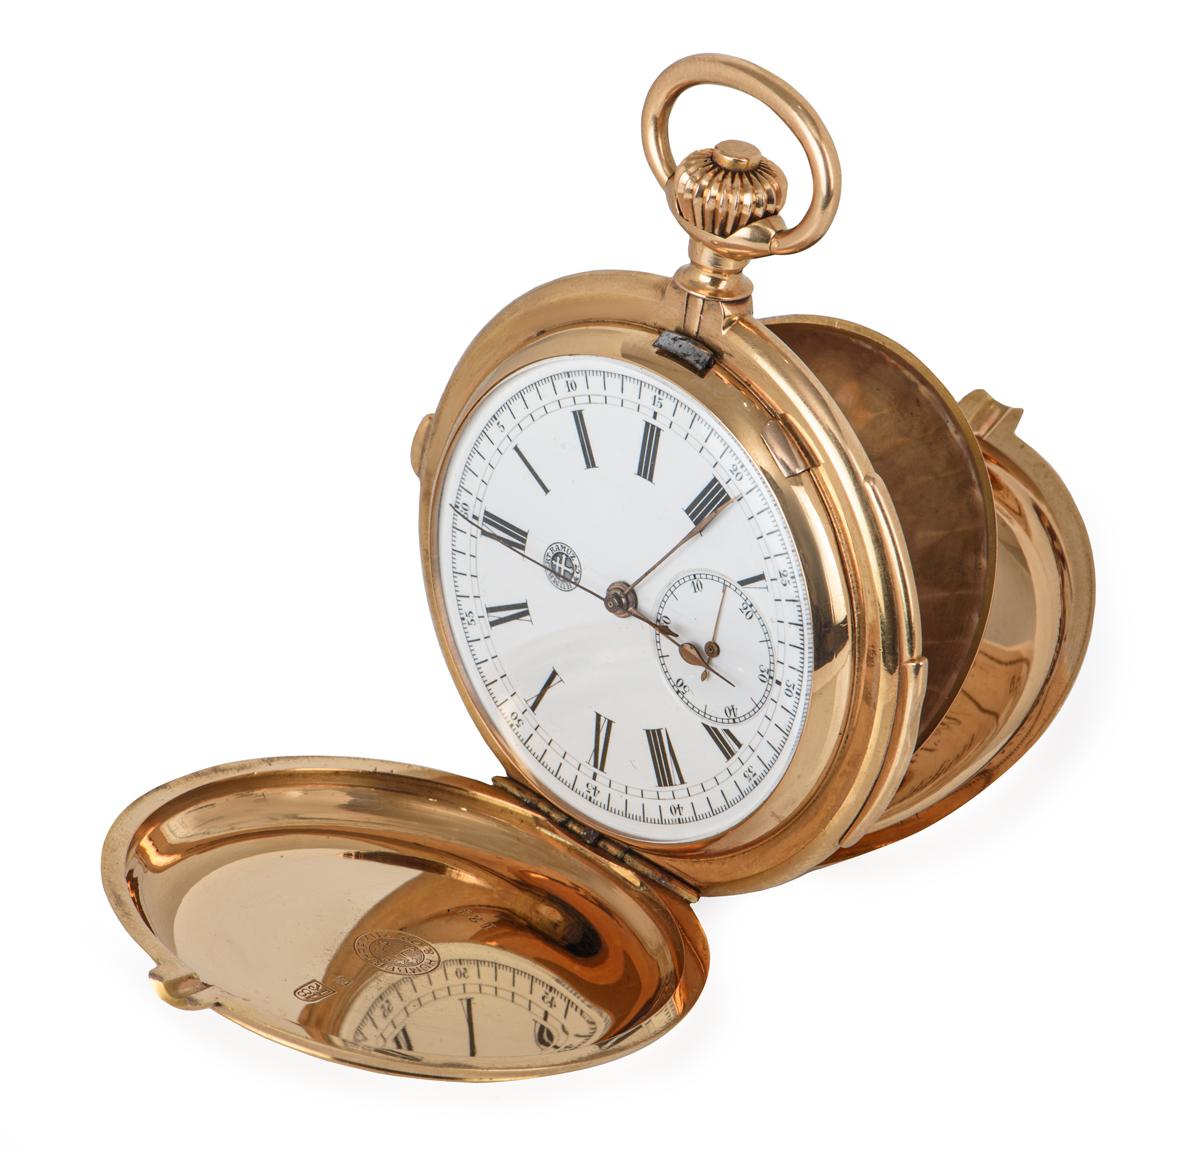 An antique NOS full hunter 60mm minute repeater chronograph pocket watch in 18k rose gold, by Humbert Ramuz & Co. Features a white enamel dial with Roman numerals and a small seconds display. Fitted with plastic glass and a manual wind